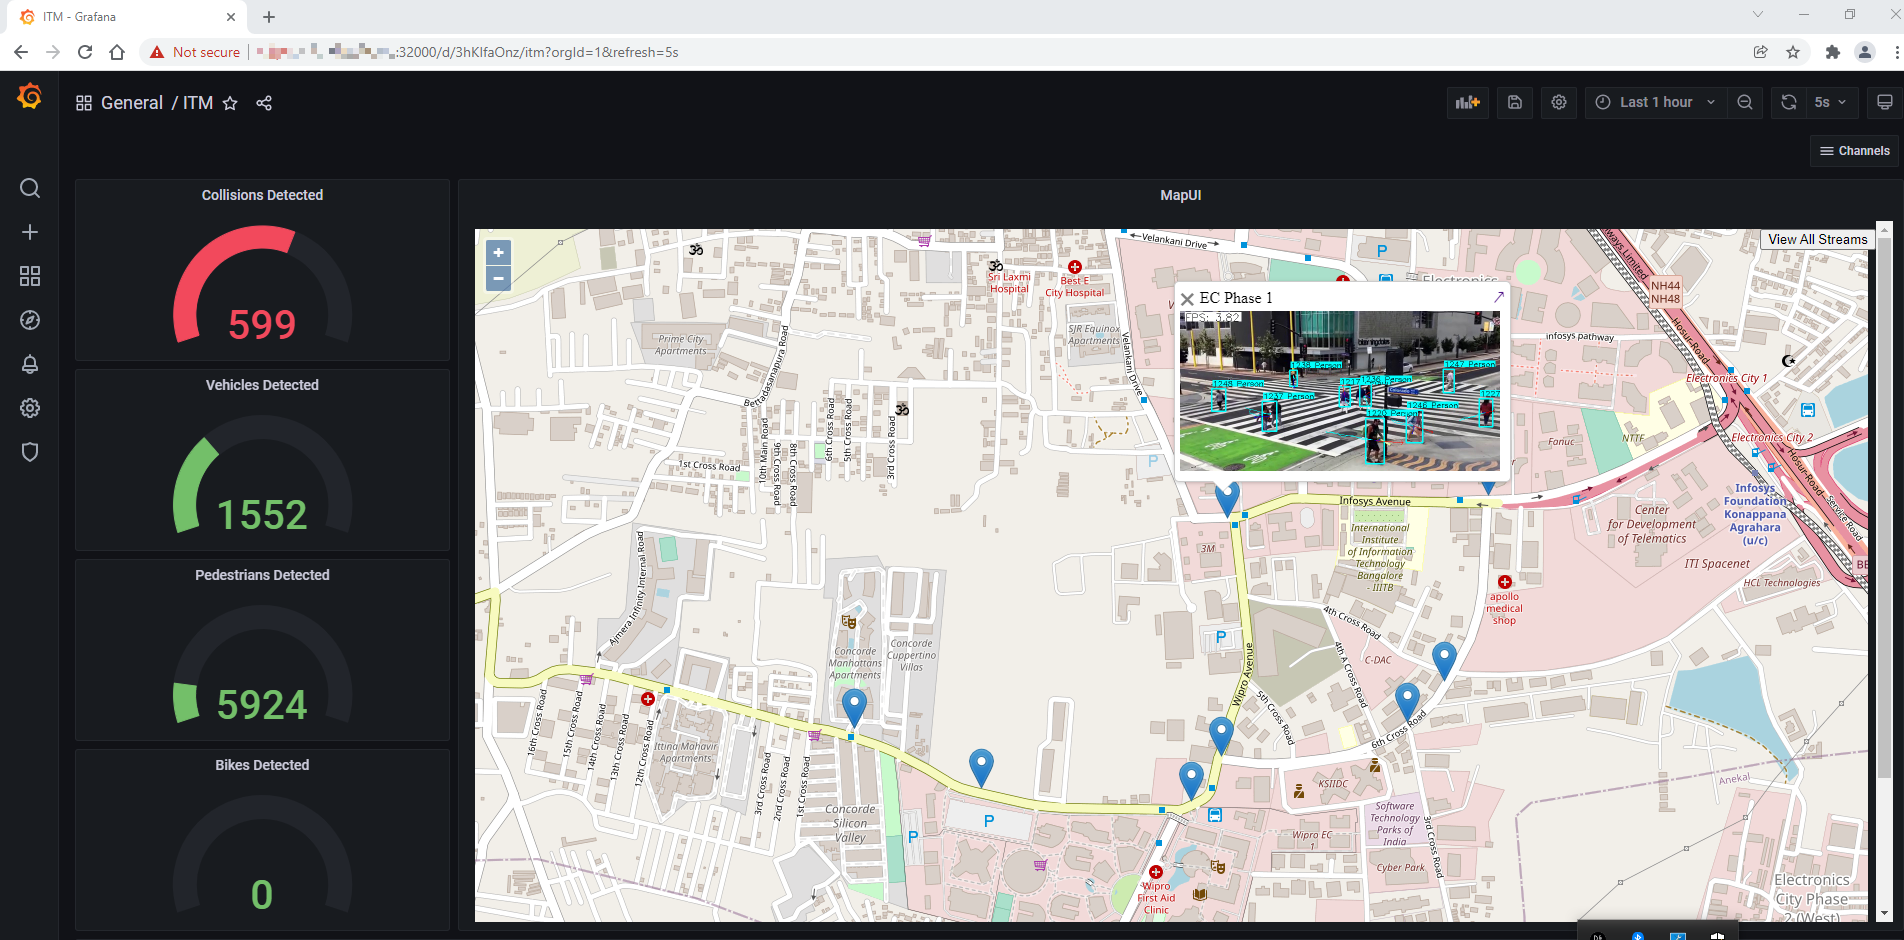 A web app dashboard with navigation, a large map of a city, and an analysis sidebar. The sidebar shows four metrics: number of collisions detected, number of vehicles detected, number of pedestrians detected, and number of bikes detected. The 8 blue drop pins on the map are the geographic coordinates of cameras. The image shows a small window of one camera feed and detected pedestrians are brightly outlined with blue.